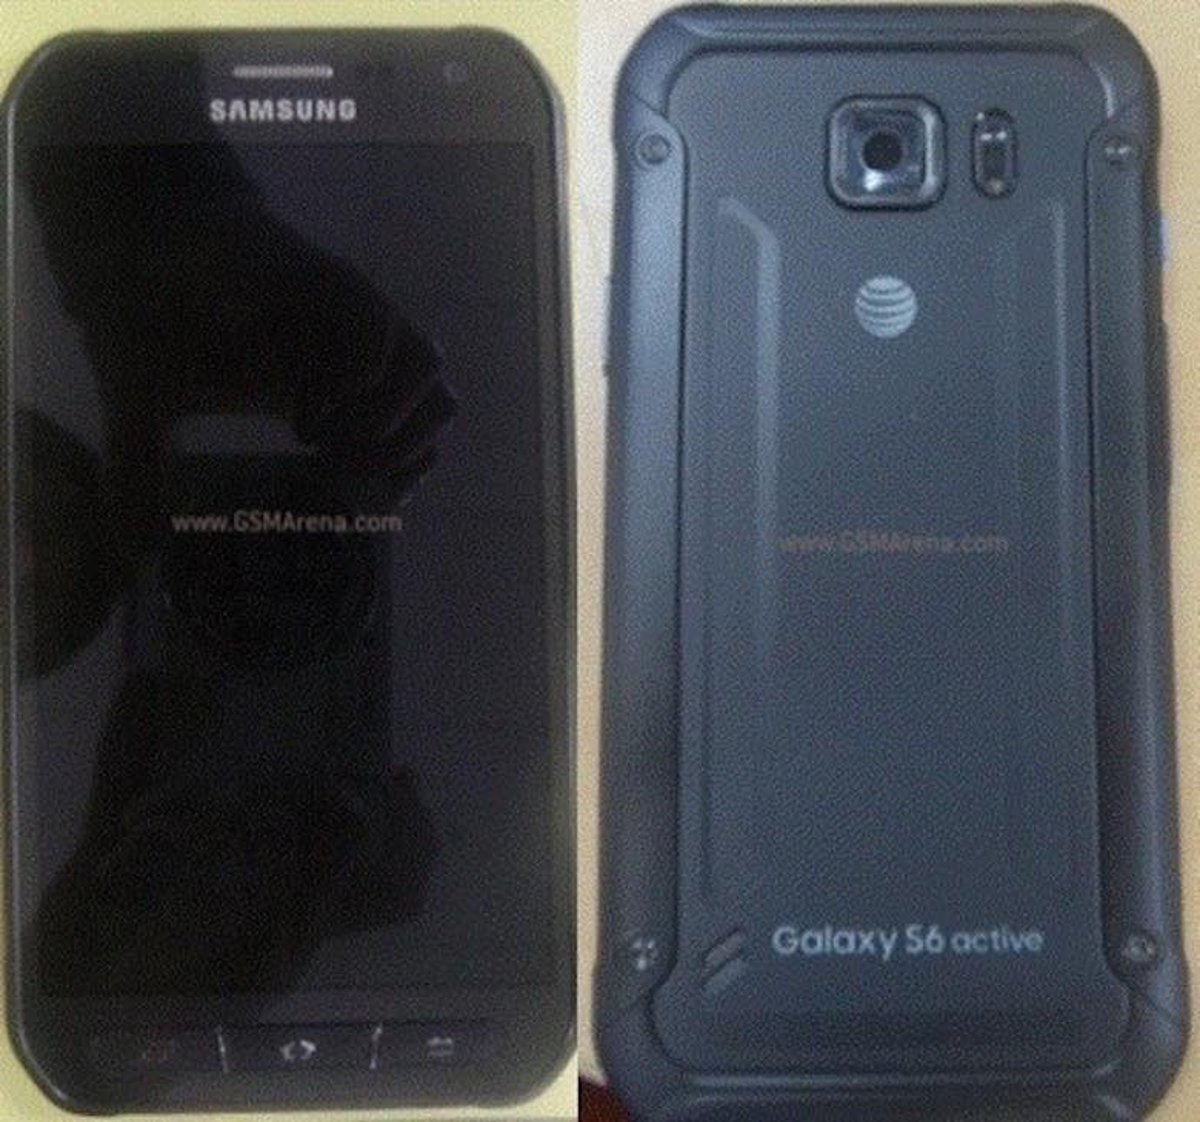 Samsung Galaxy S6 Active Leaked Image